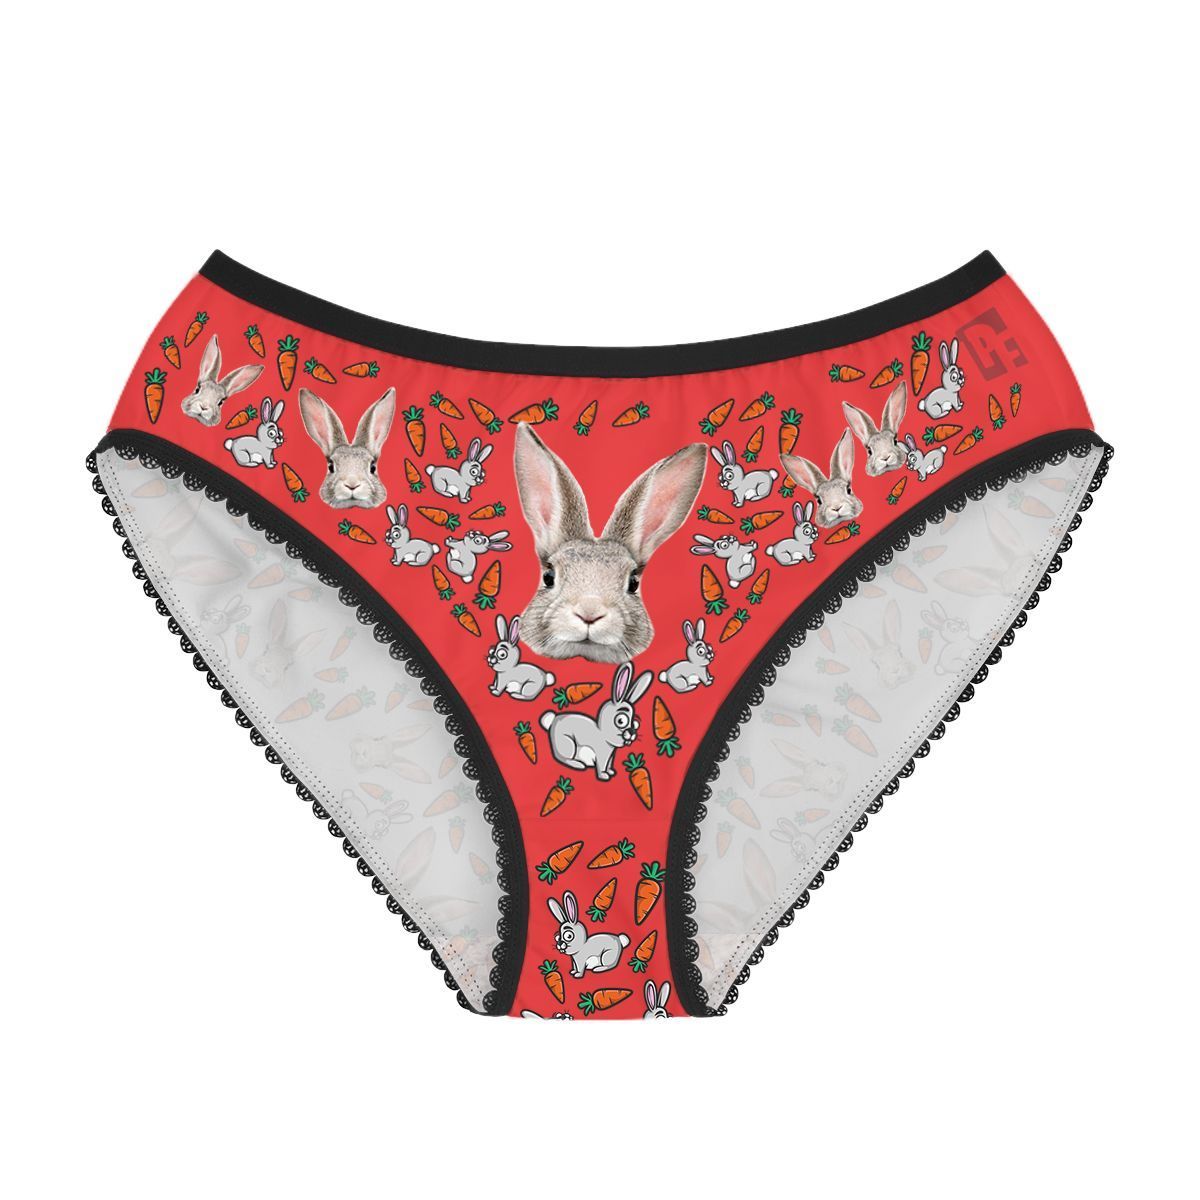 Red Bunny women's underwear briefs personalized with photo printed on them